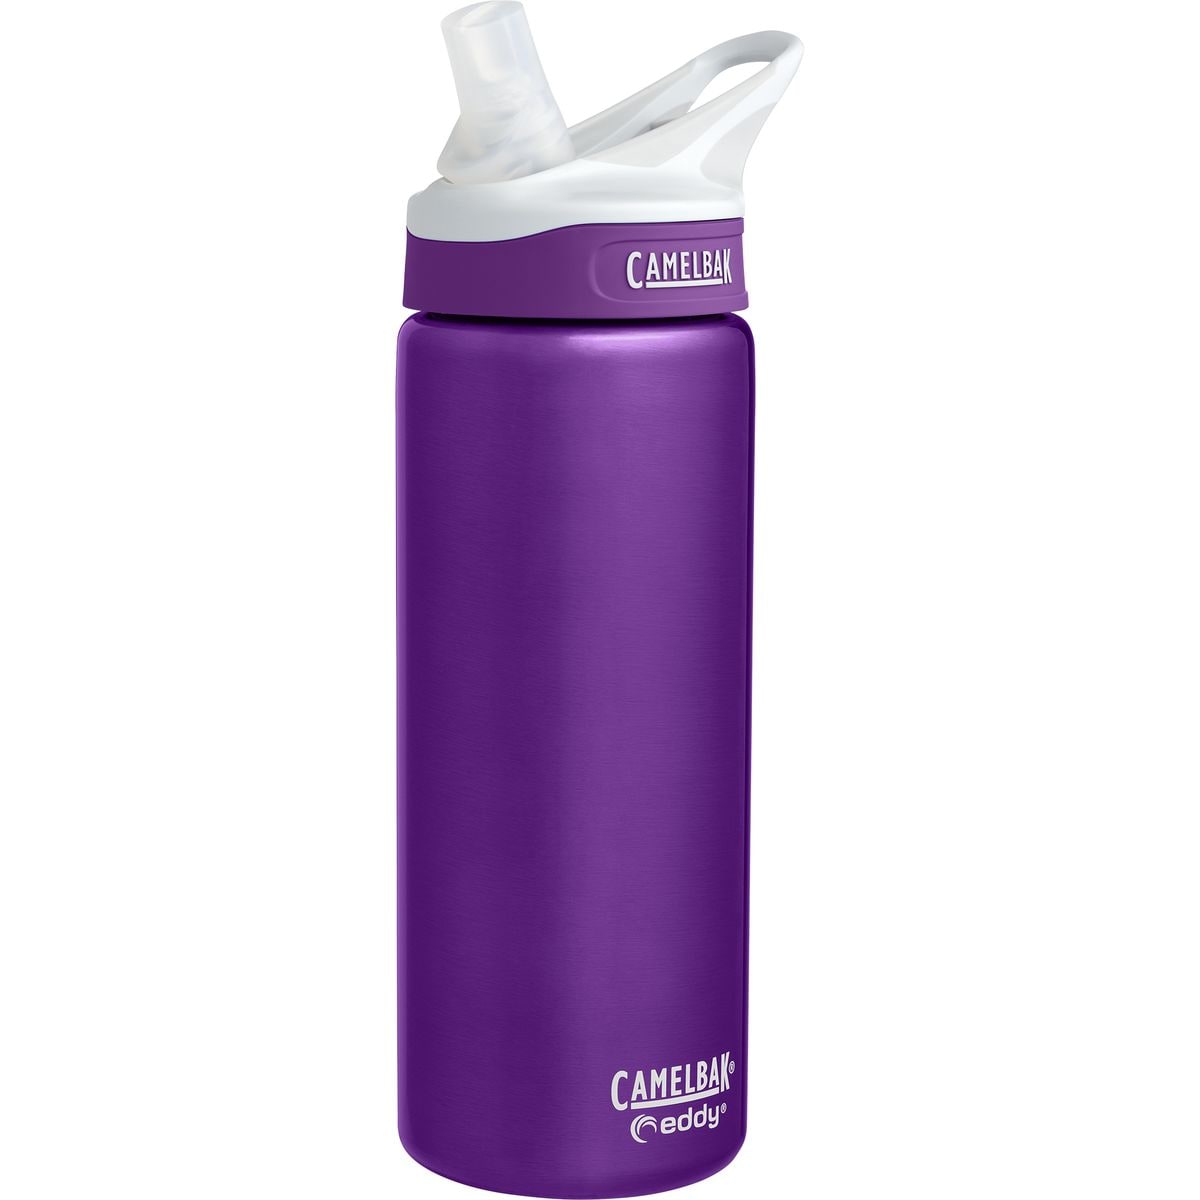 CamelBak Eddy Stainless Vacuum Insulated 6L Water Bottle